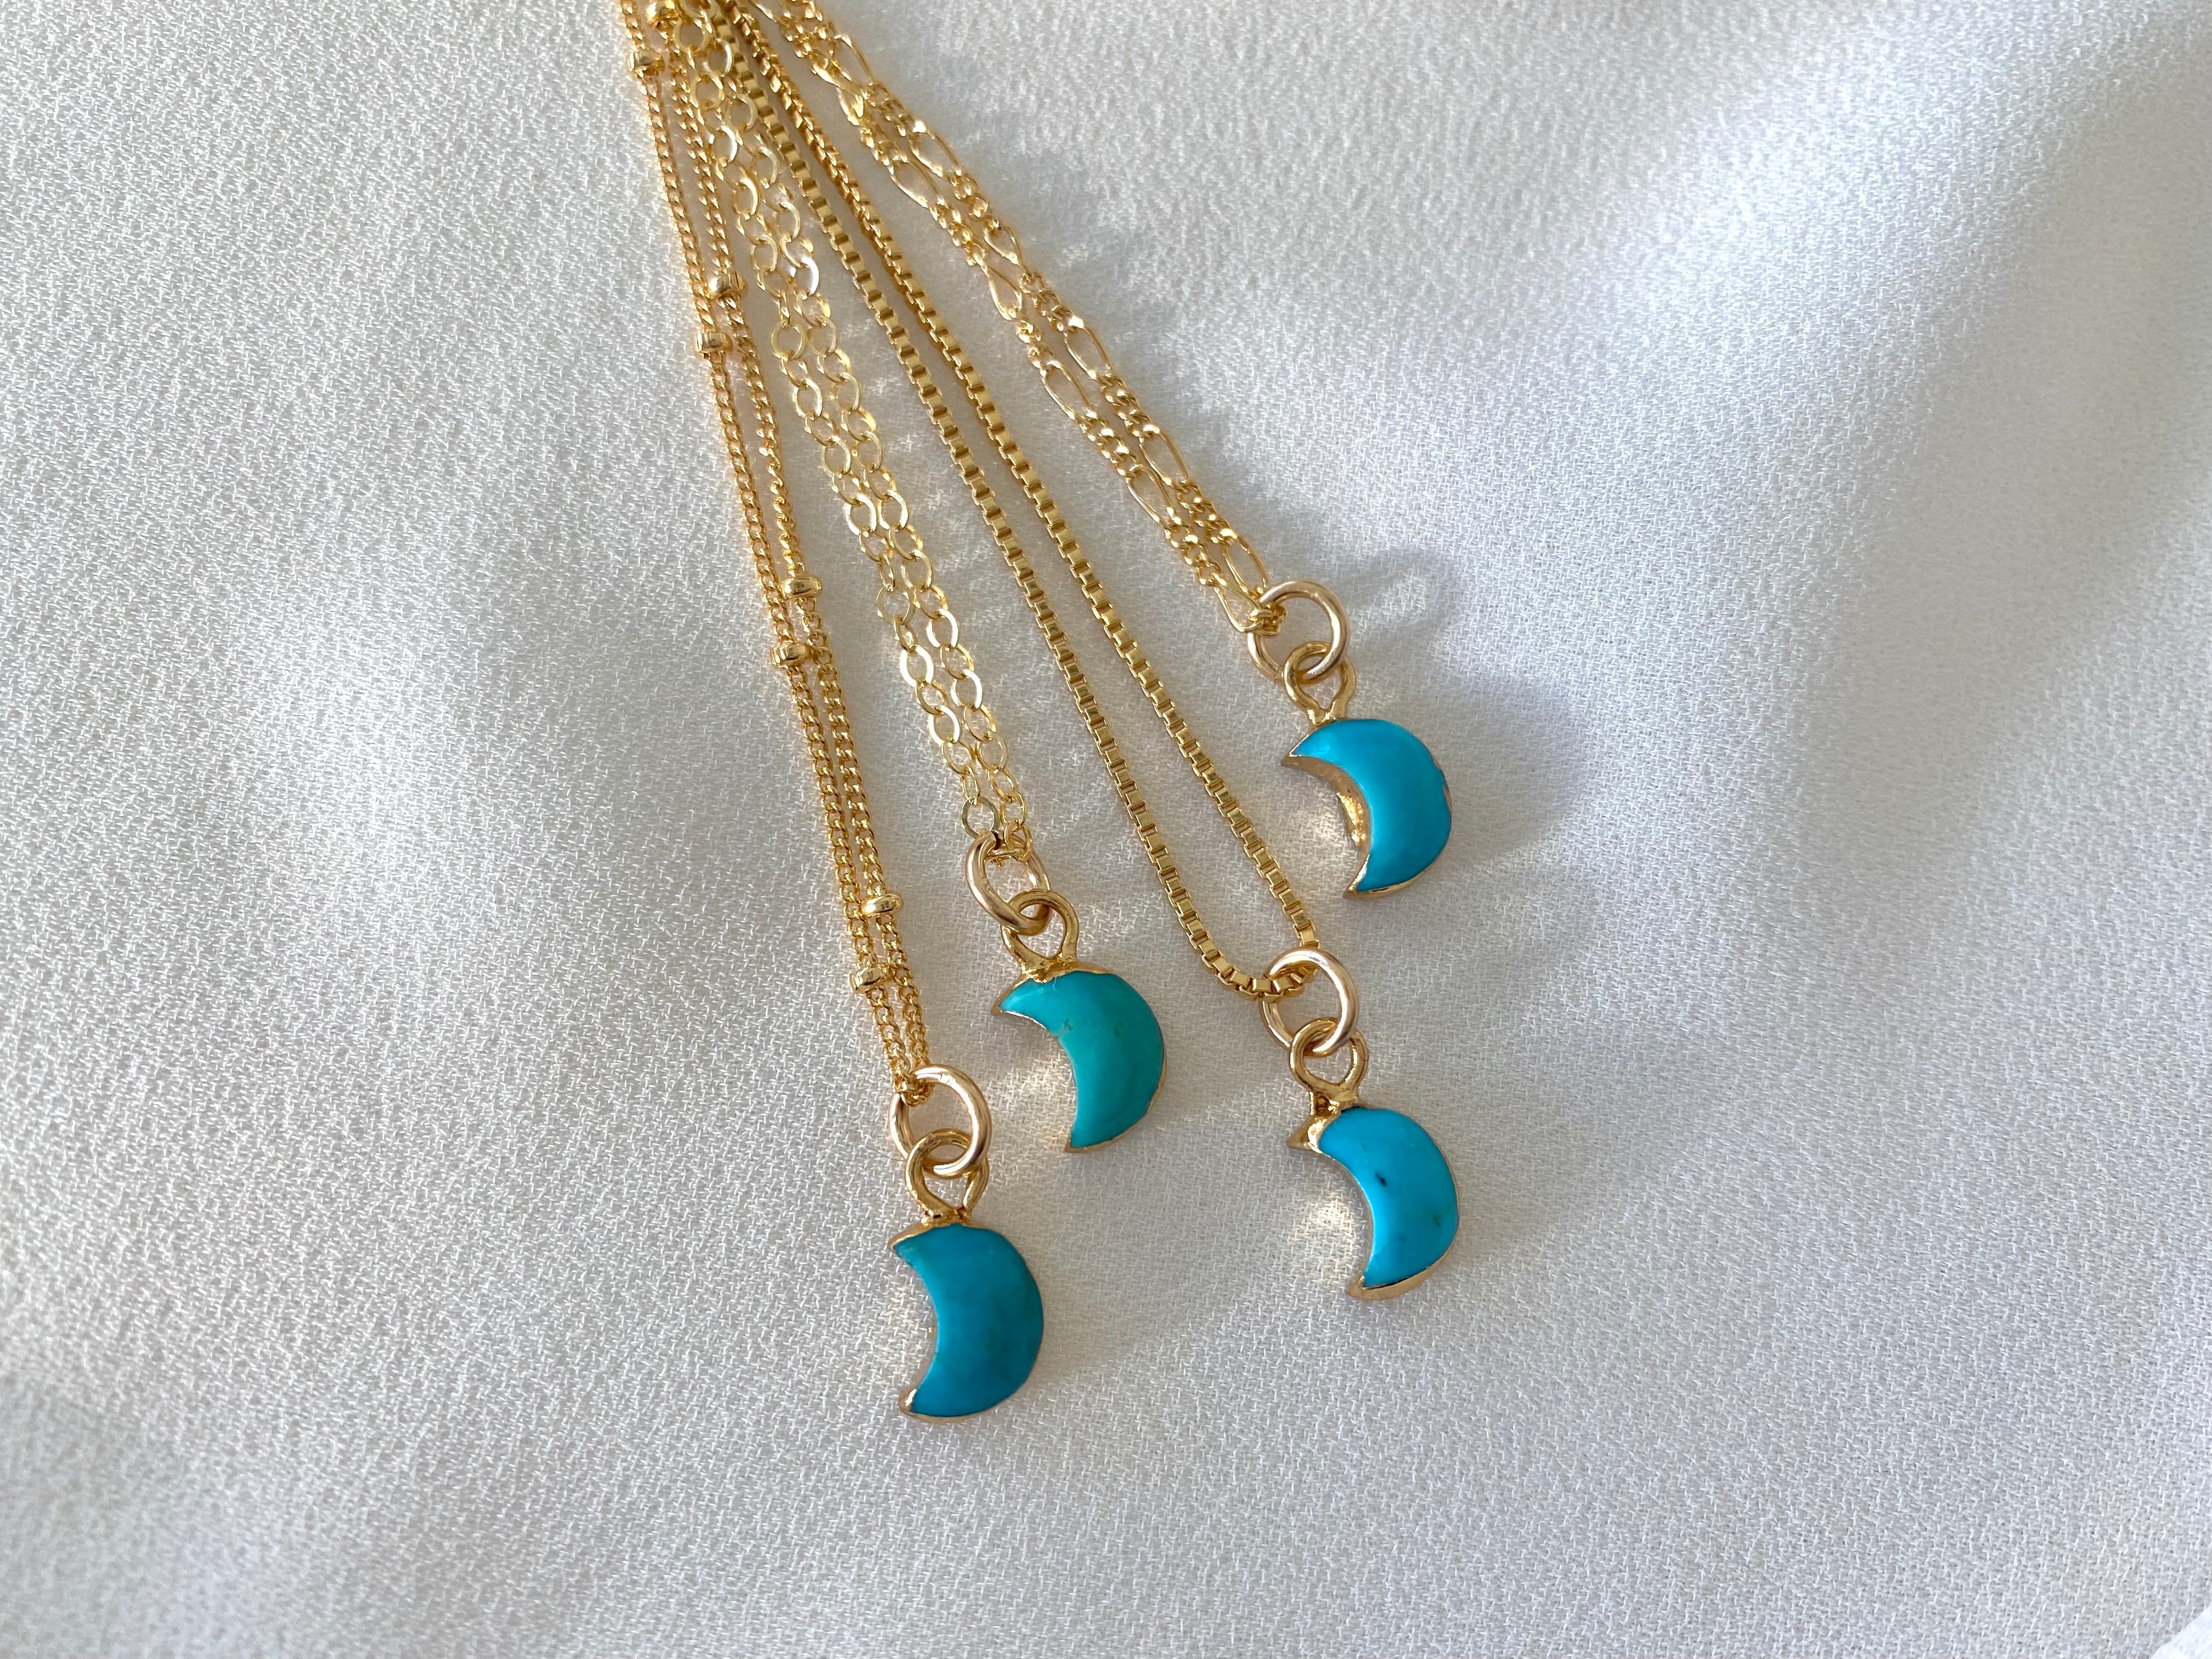 Tiny Raw Turquoise Crescent Moon Pendant Necklace - December Birthstone - Gold Chain